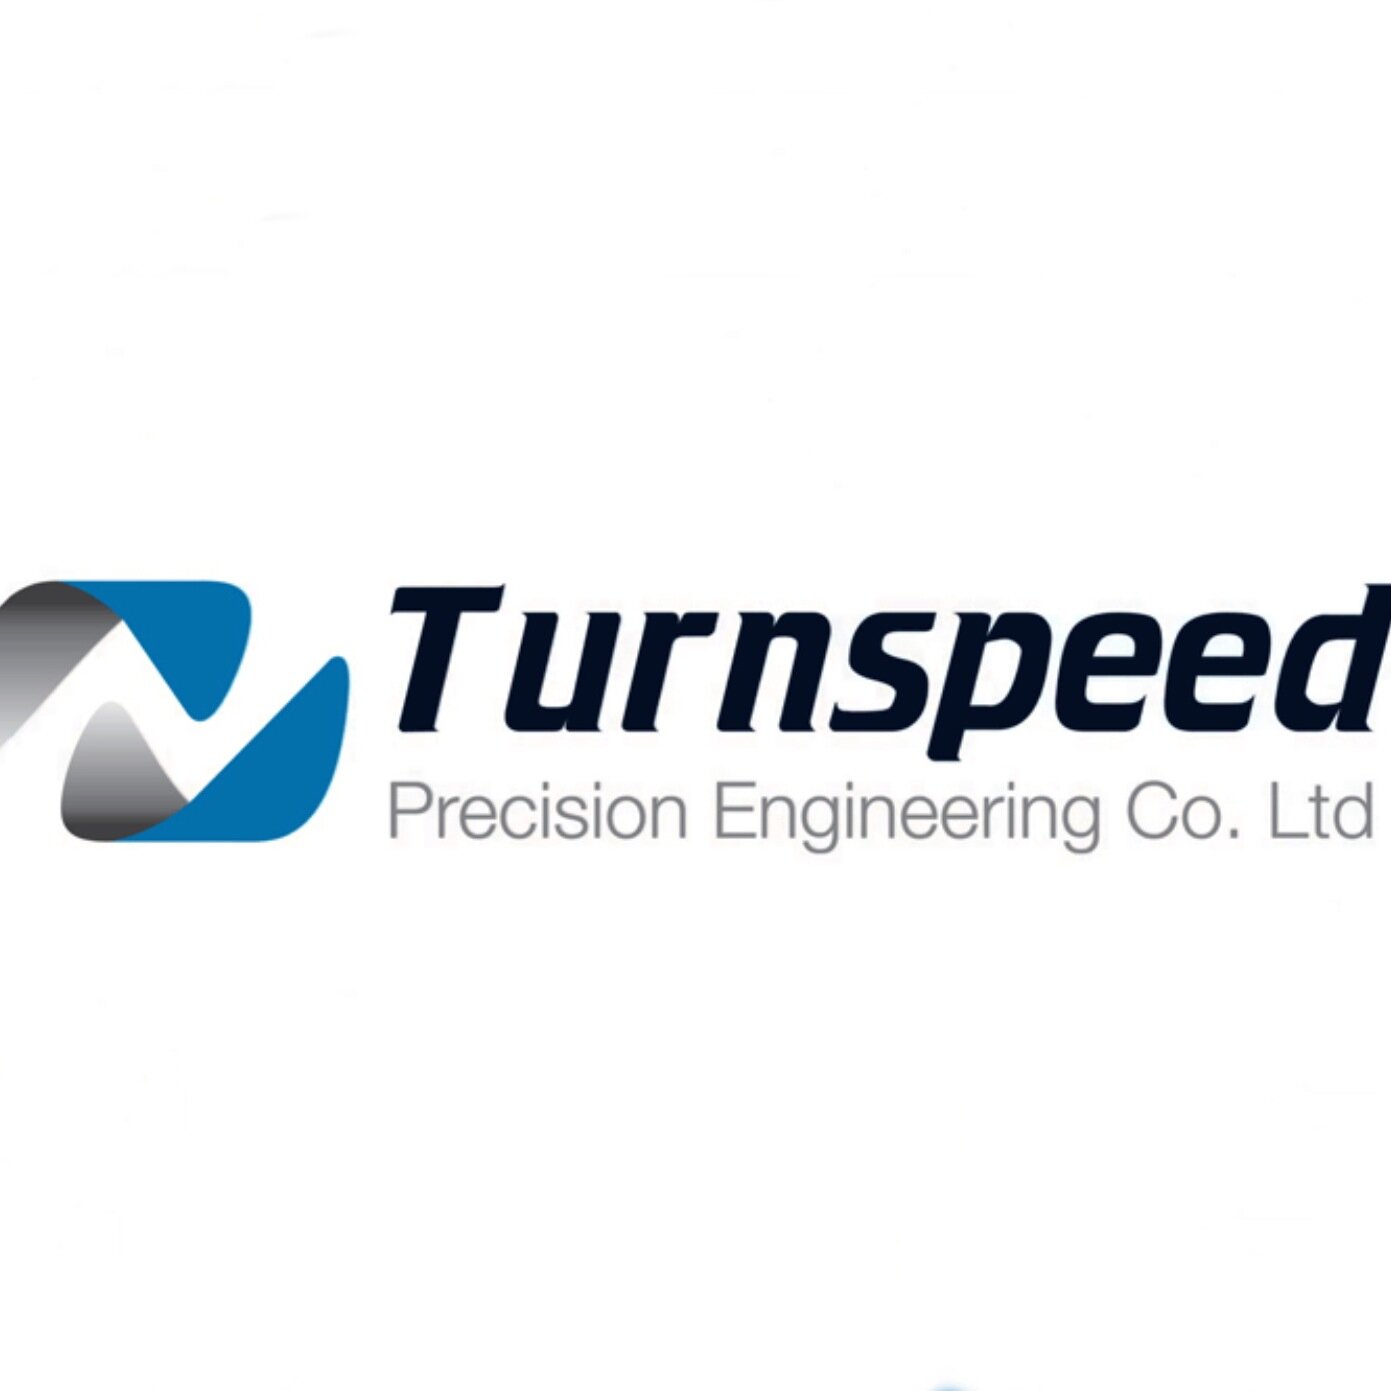 TPE is a fast paced, world class engineering facility. Specialising in manufacturing precision components to the automotive, aircraft & hydraulic industry.